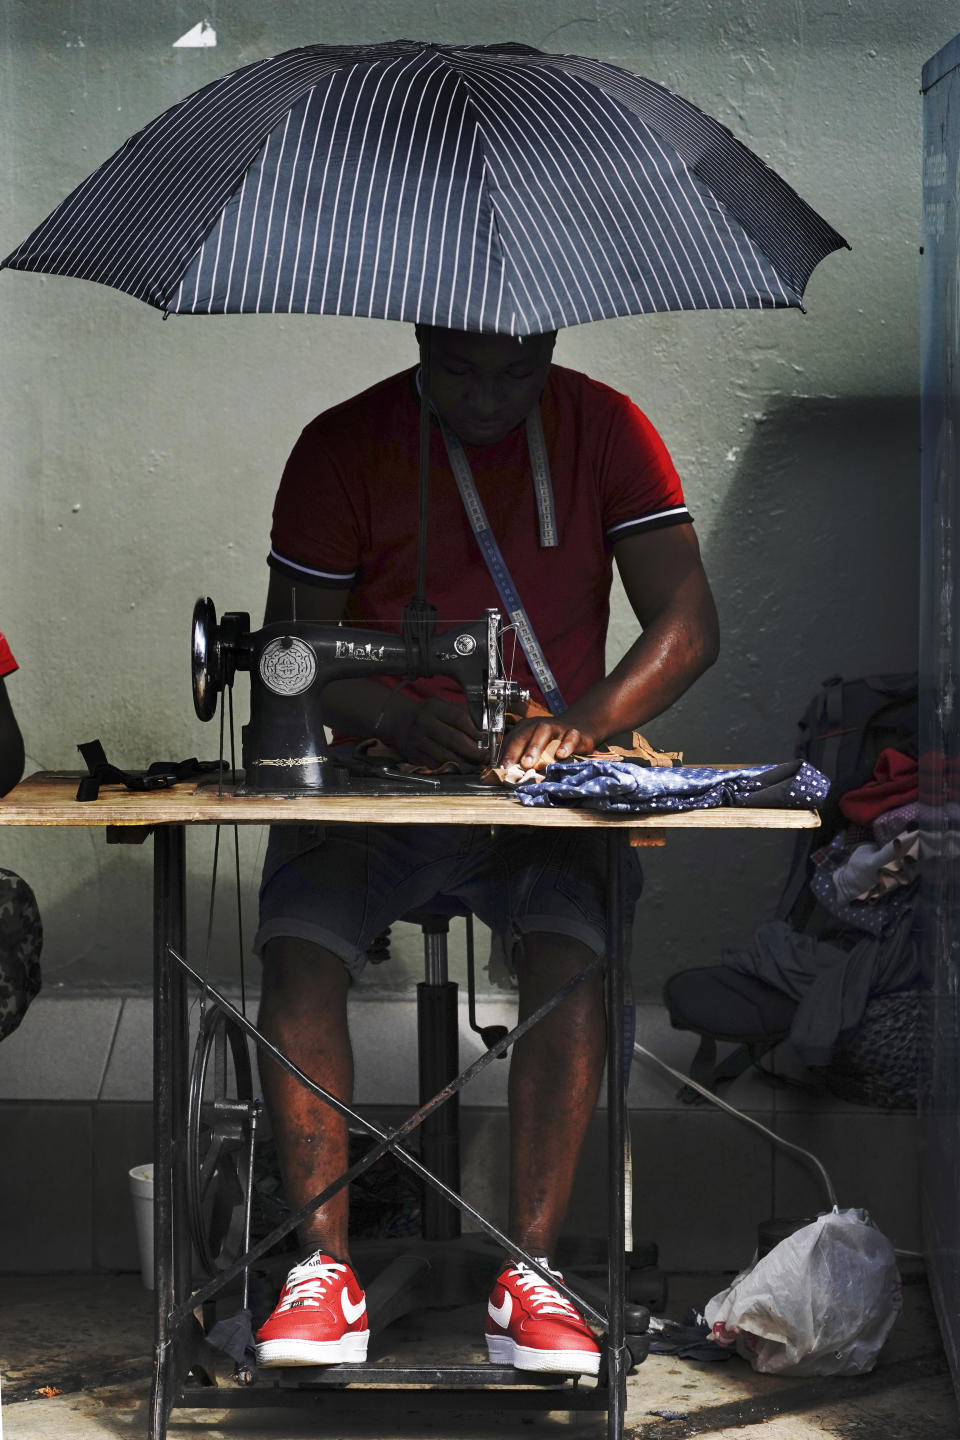 FILE - In this Sept. 3, 2021 file photo, a Haitian migrant operates a sewing machine at a market in Tapachula, Mexico. Thousands of mostly Haitian migrants have been stuck in the southern city of Tapachula, many waiting here for months and some up to a year for asylum requests to be processed. (AP Photo/Marco Ugarte, File)